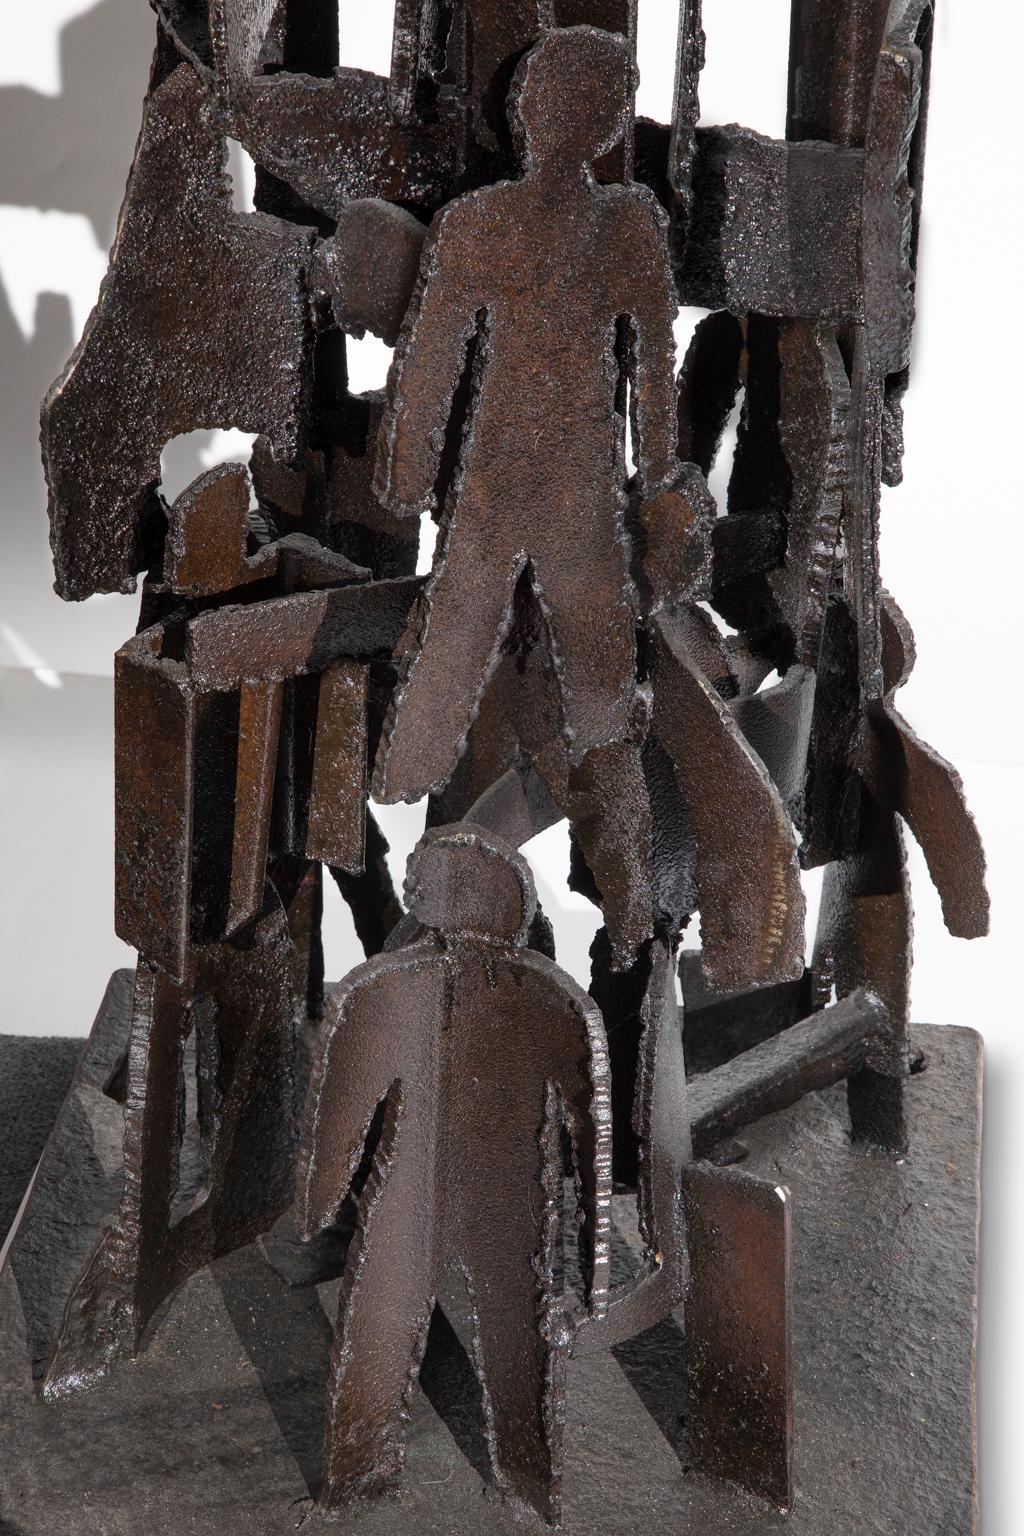 UNTITLED, Abstract/Figurative, Black Welded Steel, Cass Corridor Artist, Detroit For Sale 3